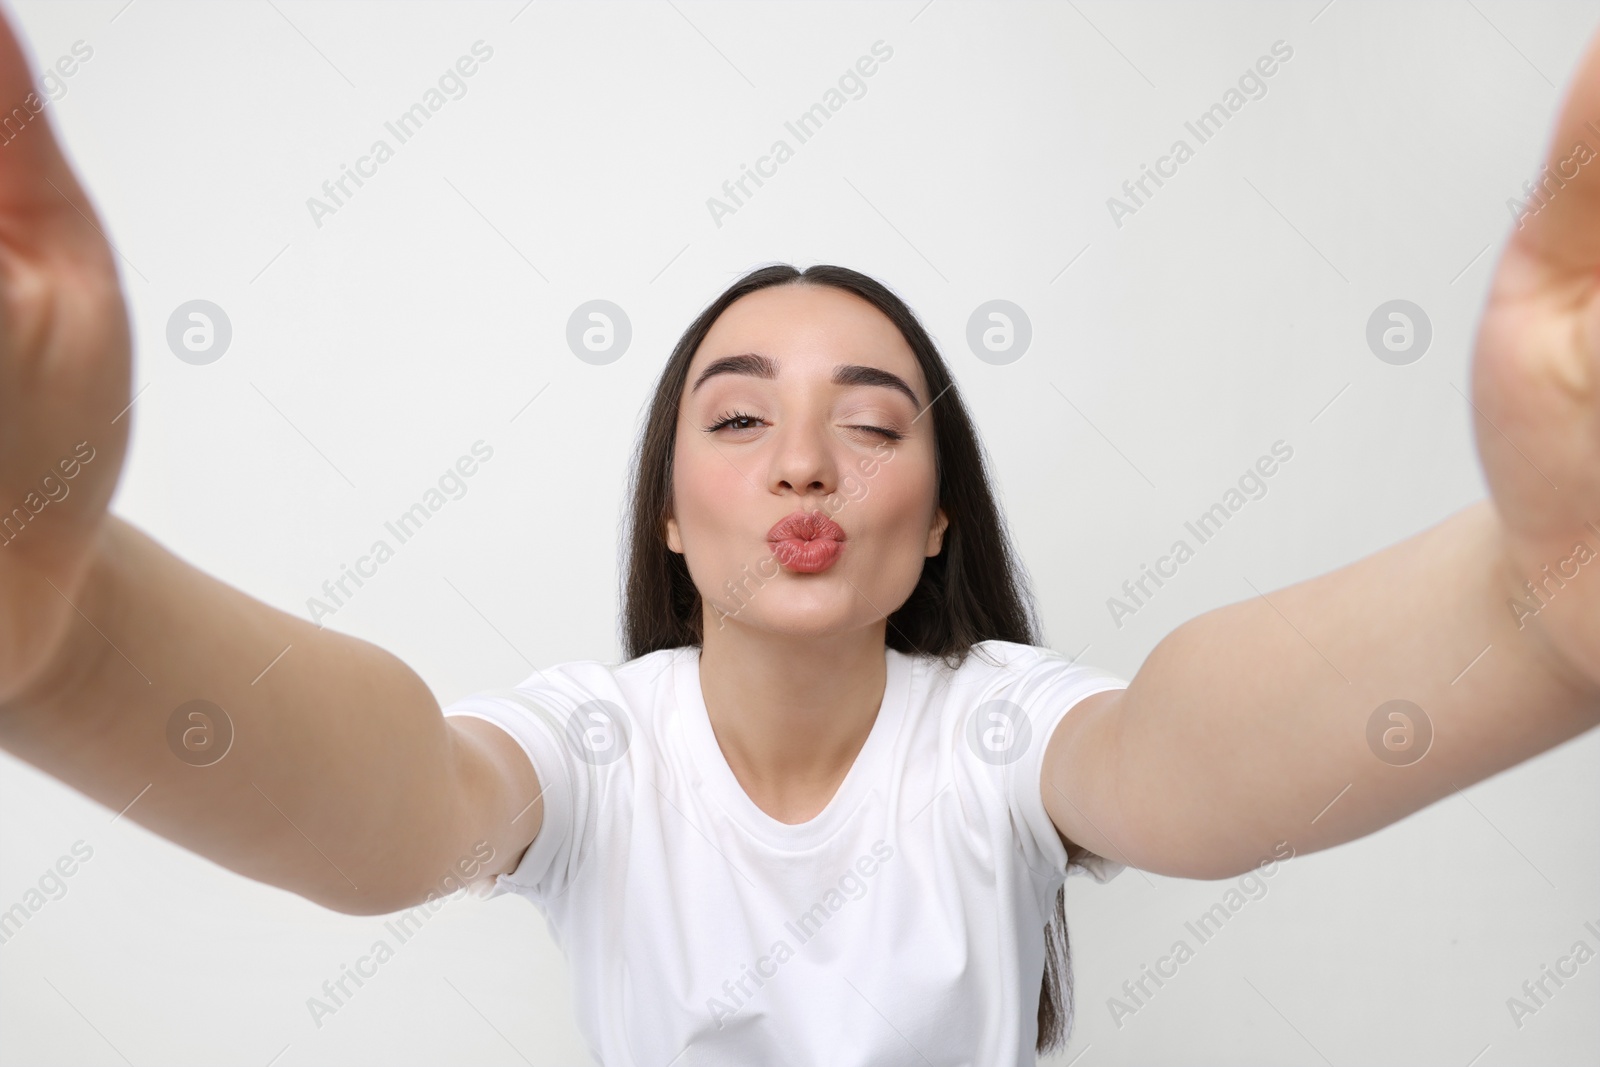 Photo of Young woman taking selfie and blowing kiss on white background